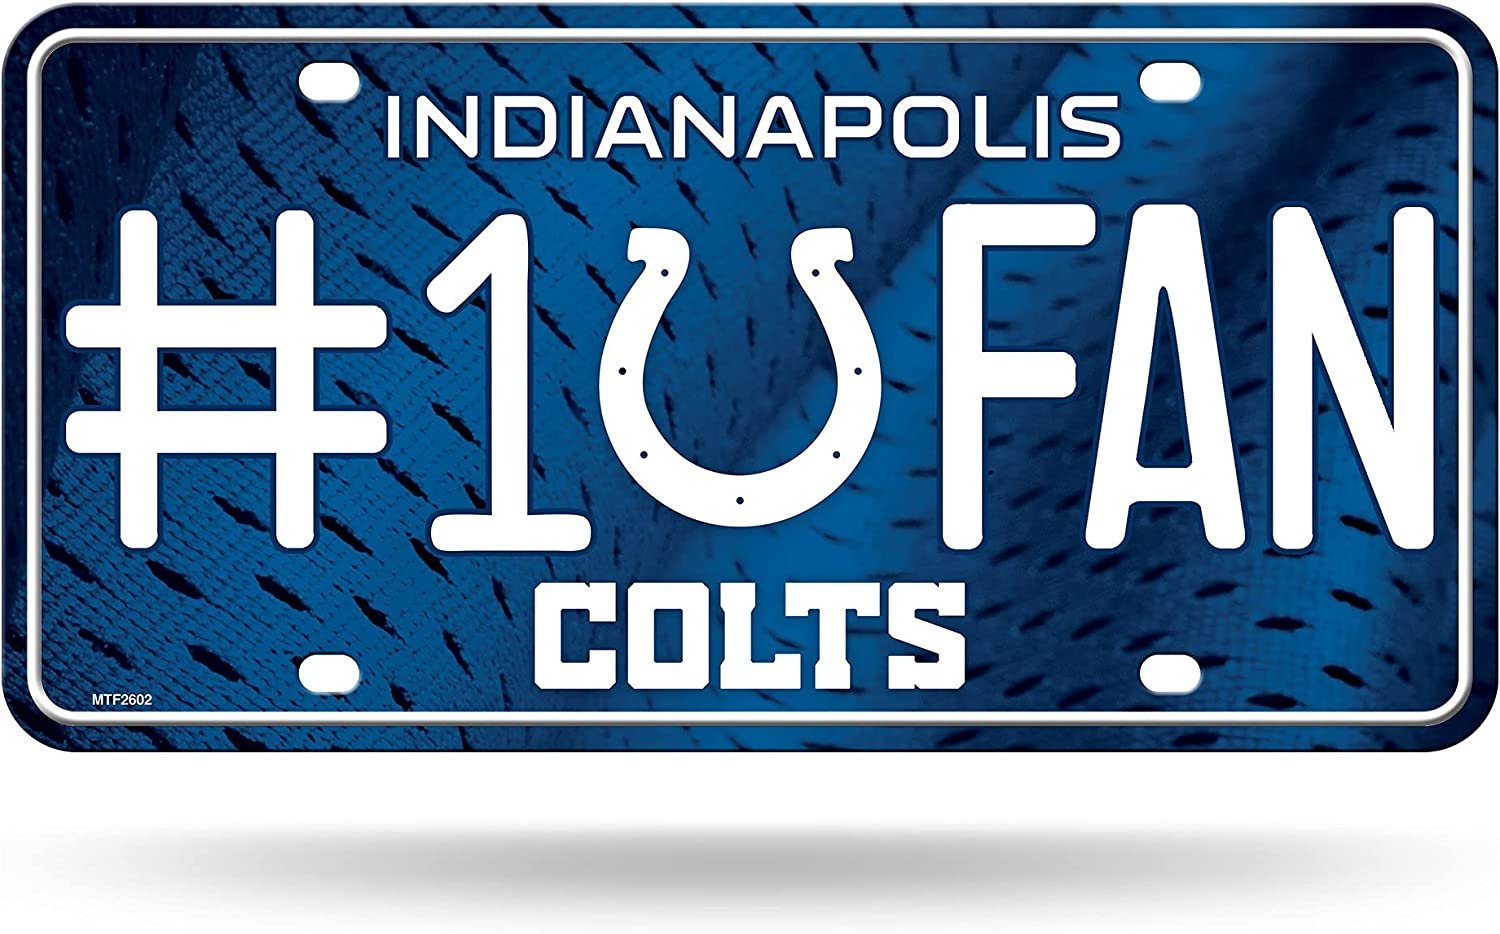 Indianapolis Colts Metal Auto Tag License Plate, #1 Fan Design, 12x6 Inch